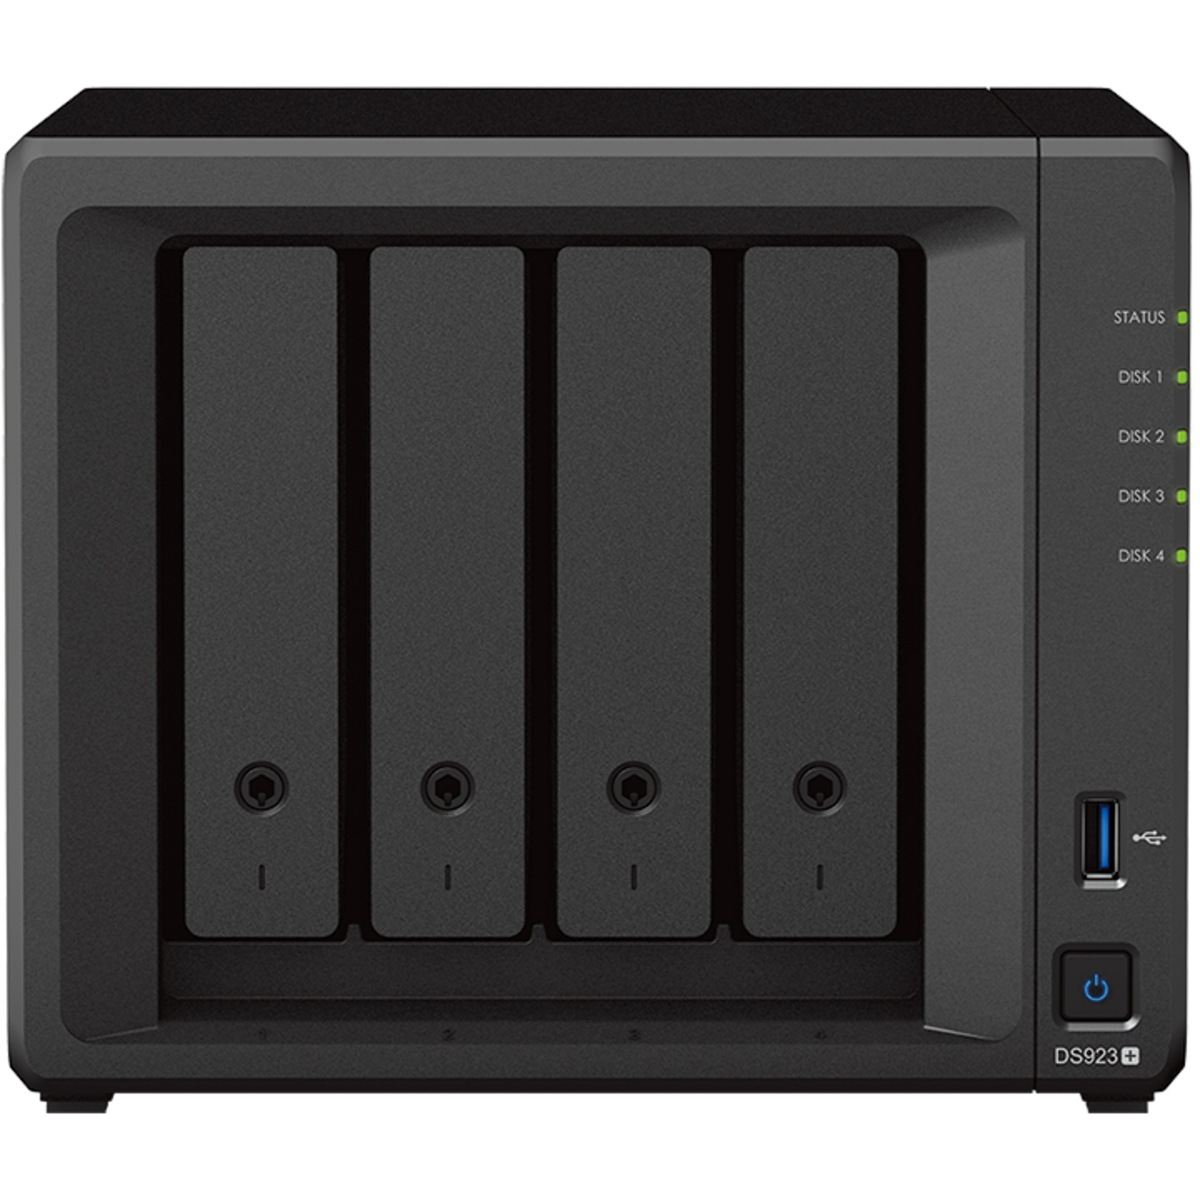 Synology DiskStation DS923+ 48tb 4-Bay Desktop Multimedia / Power User / Business NAS - Network Attached Storage Device 3x16tb Seagate IronWolf Pro ST16000NT001 3.5 7200rpm SATA 6Gb/s HDD NAS Class Drives Installed - Burn-In Tested - ON SALE - FREE RAM UPGRADE DiskStation DS923+